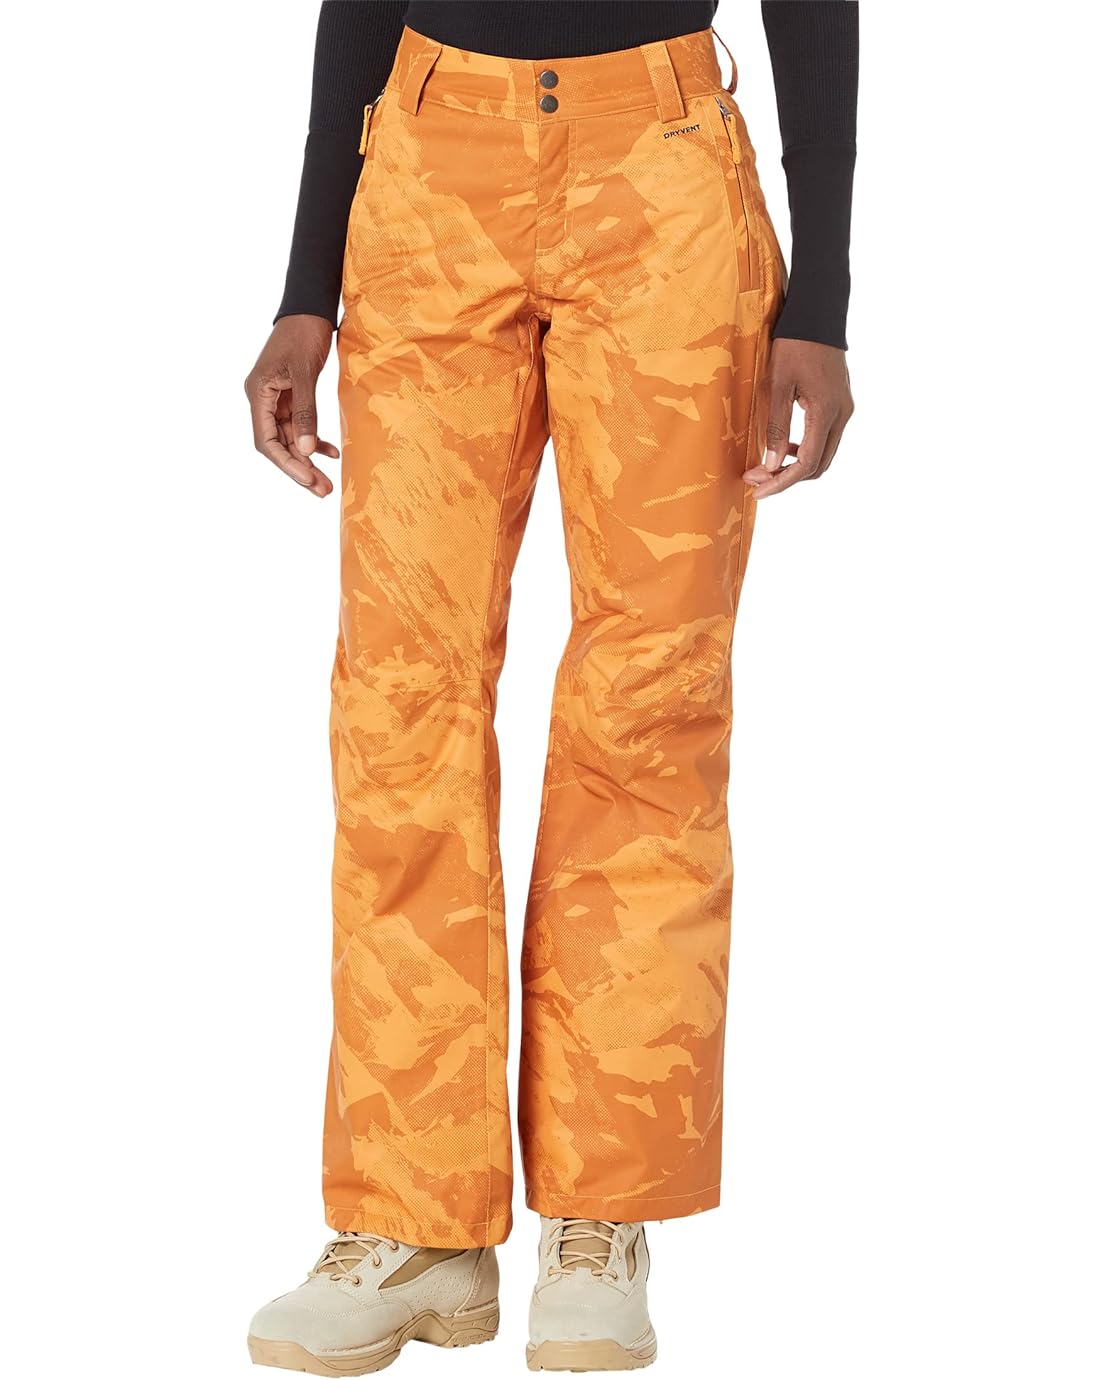 The North Face Sally Pants